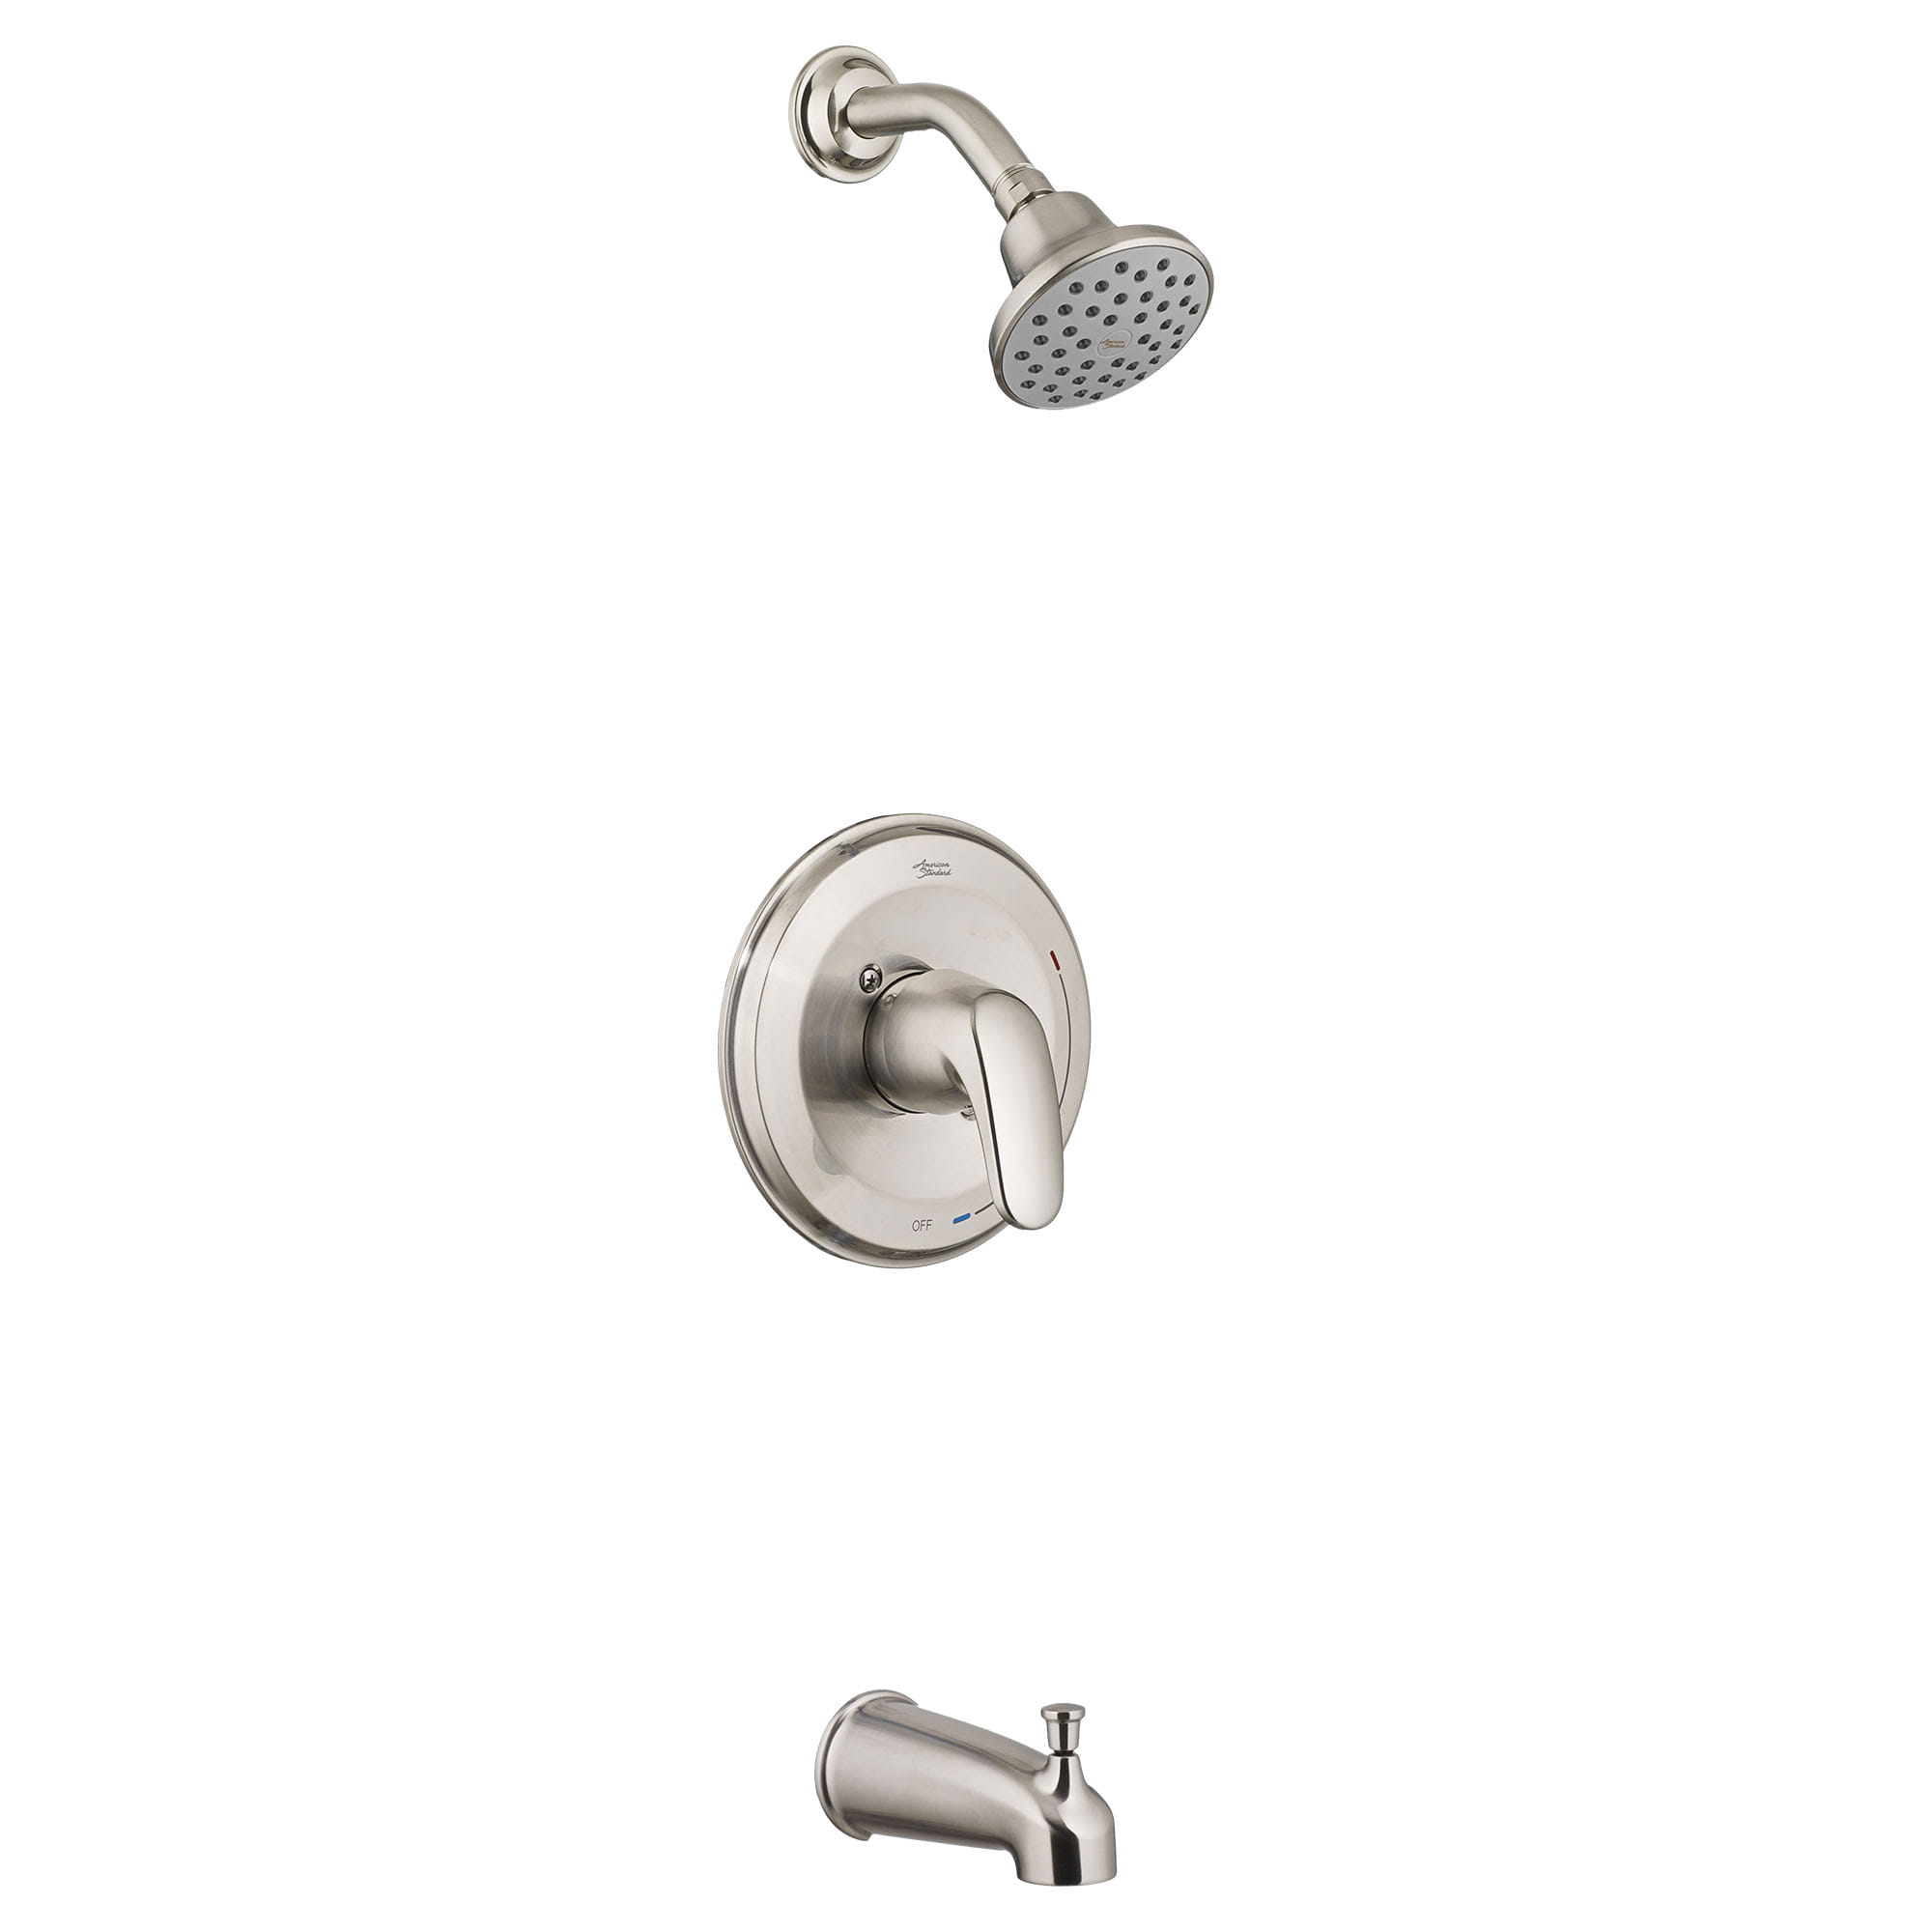 Colony PRO  175 gpm 66 L min Tub and Shower Trim Kit With Water Saving Showerhead Double Ceramic Pressure Balance Cartridge With Lever Handle   BRUSHED NICKEL